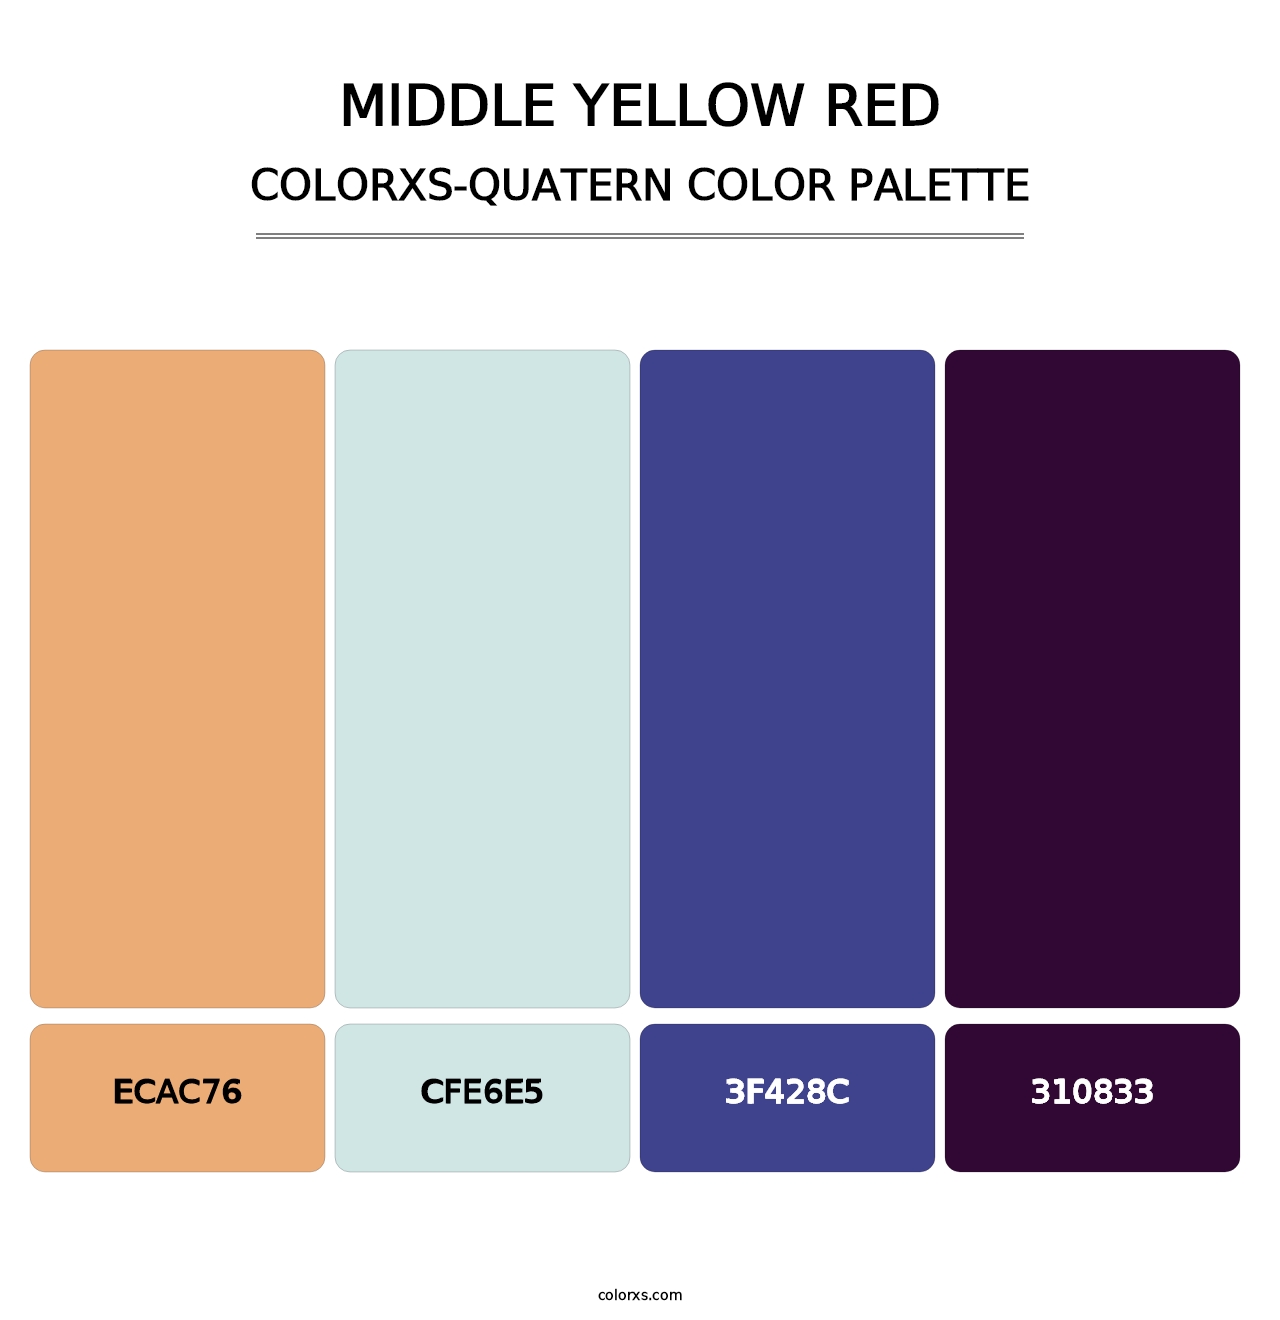 Middle Yellow Red - Colorxs Quatern Palette